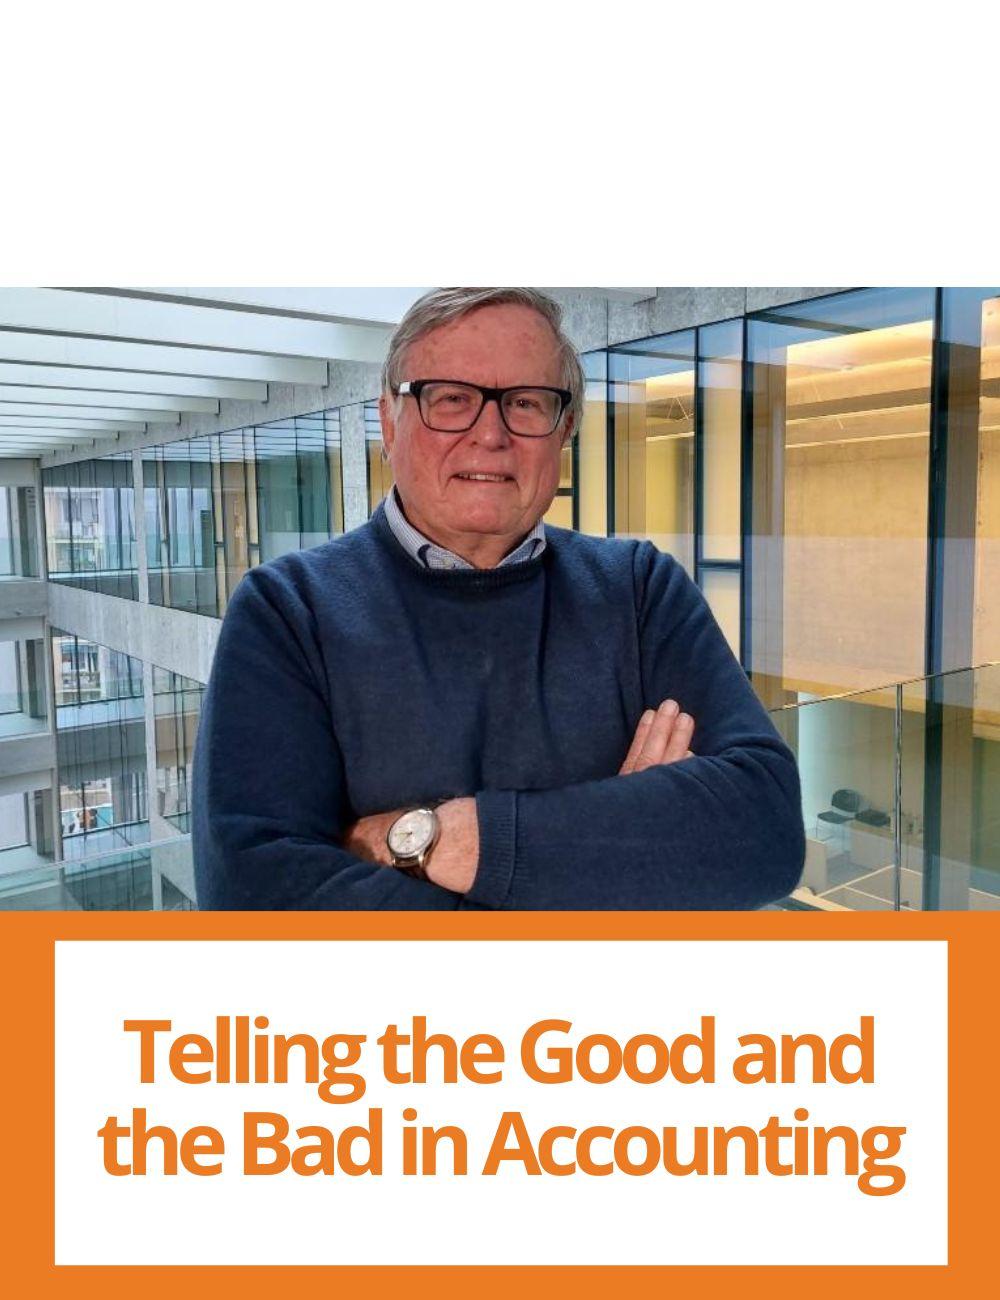 Link to related stories. Image: professor Stephen Penman. Story headline: Telling the Good and the Bad in Accounting